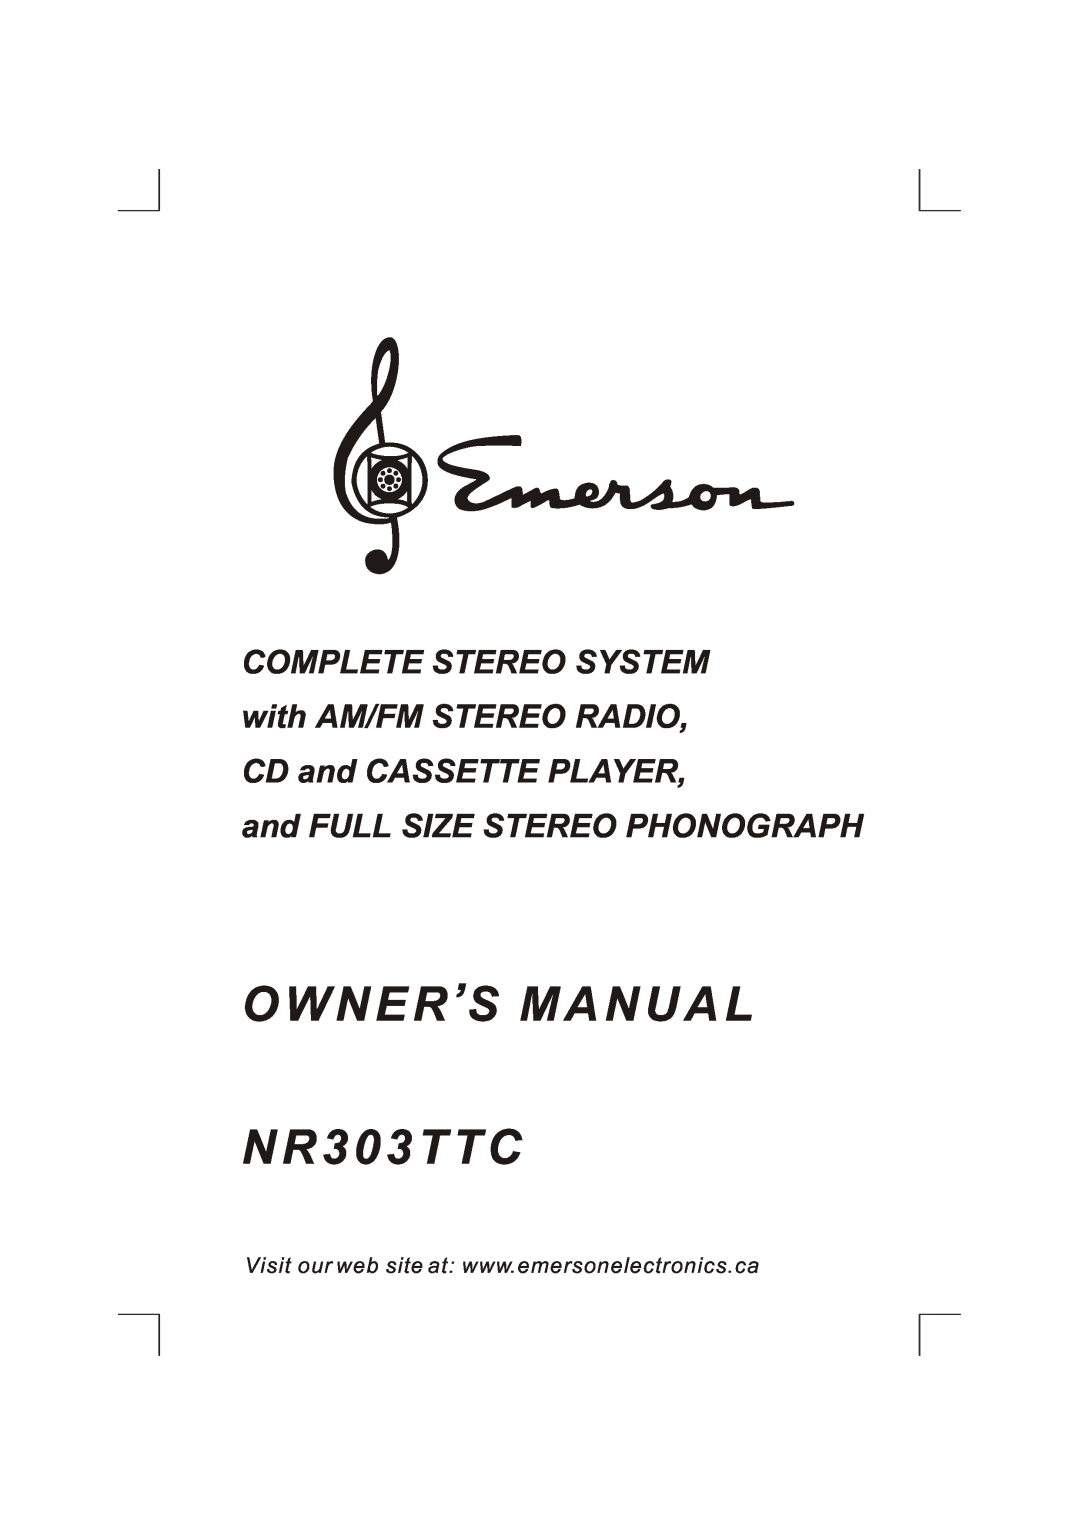 Emerson owner manual O W N E R S MANUAL NR303TTC, and FULL SIZE STEREO PHONOGRAPH 